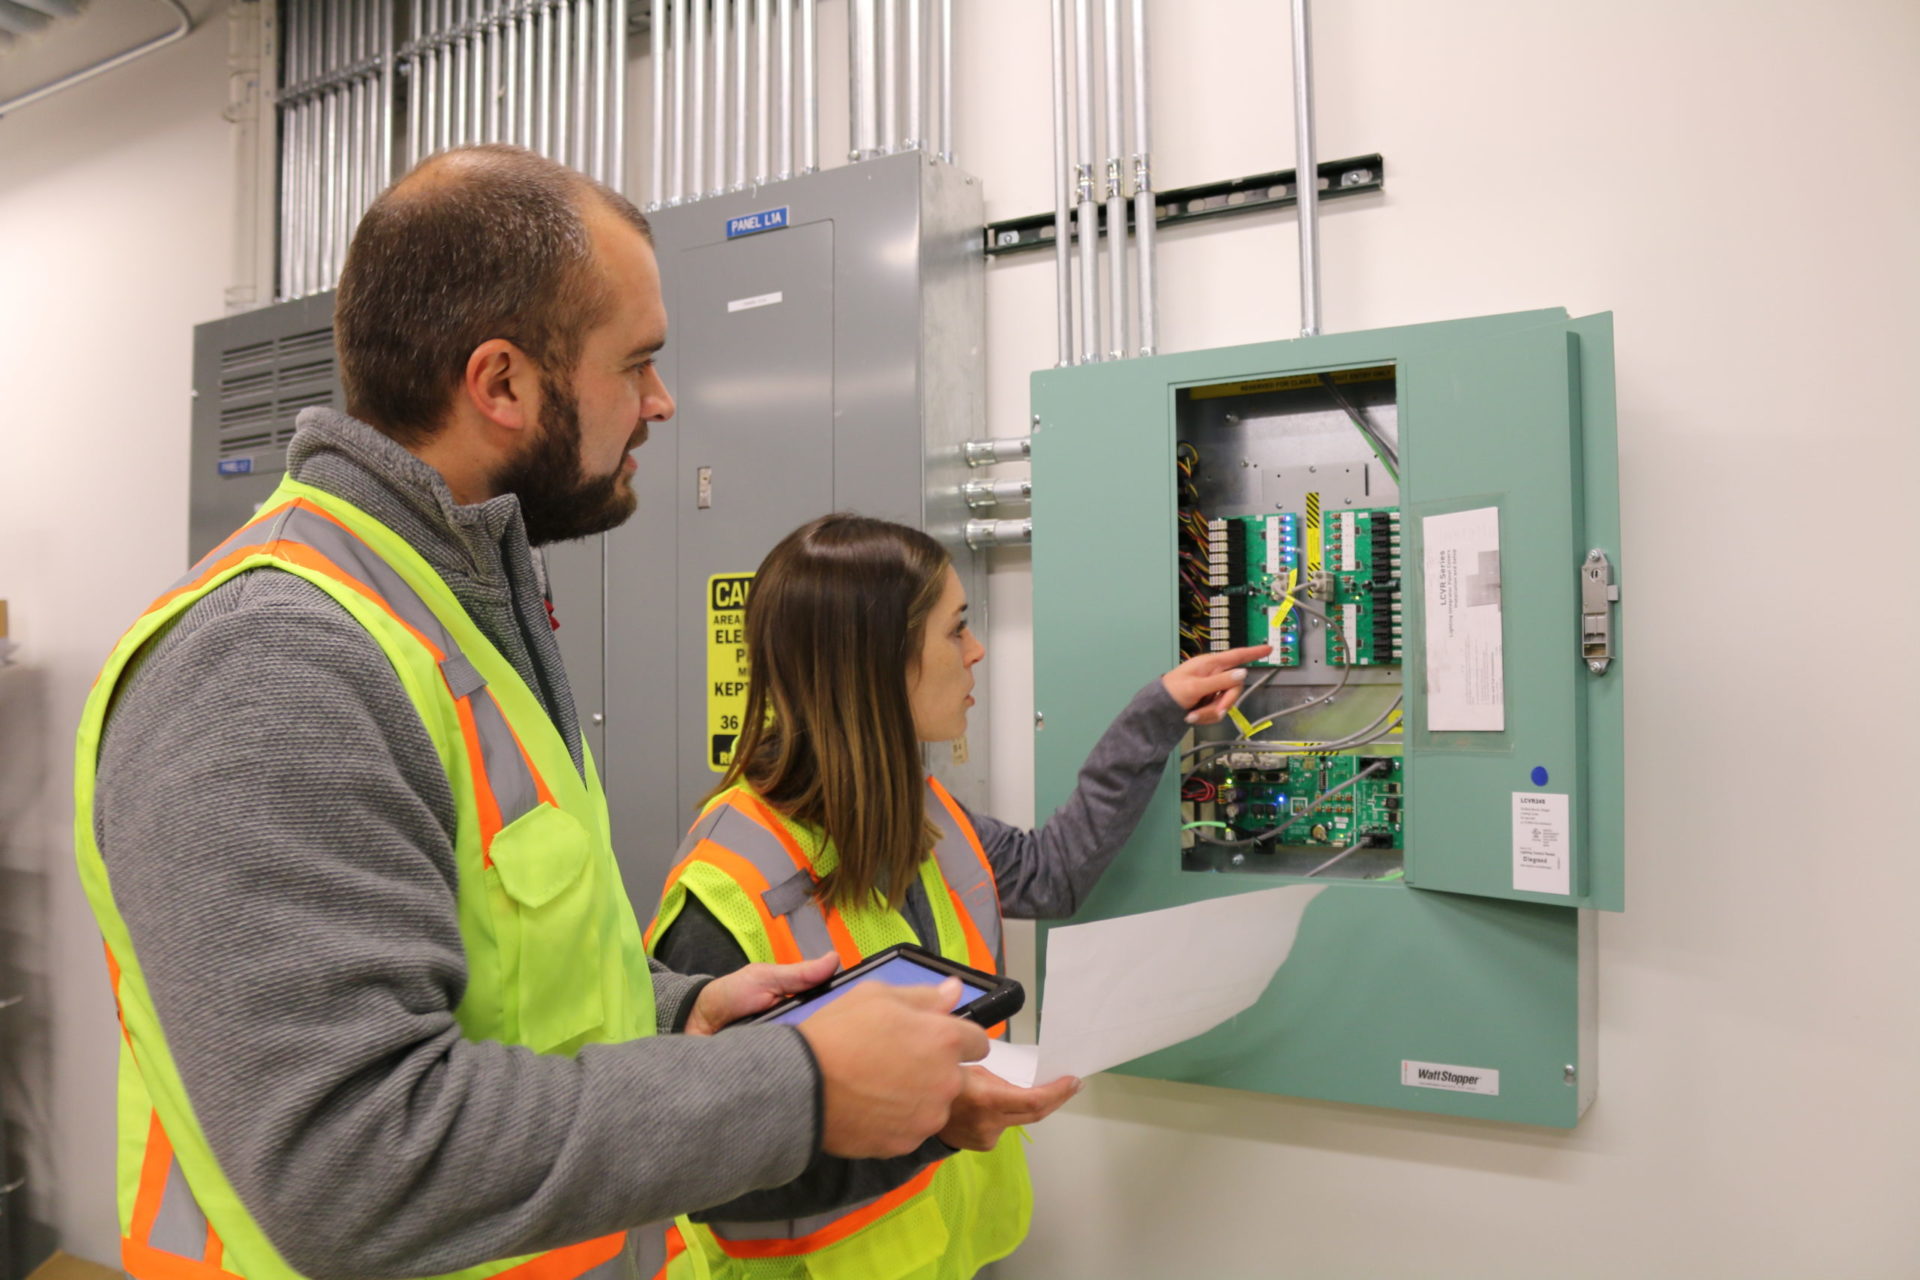 Two McCownGordon Construction workers examining a fuse box